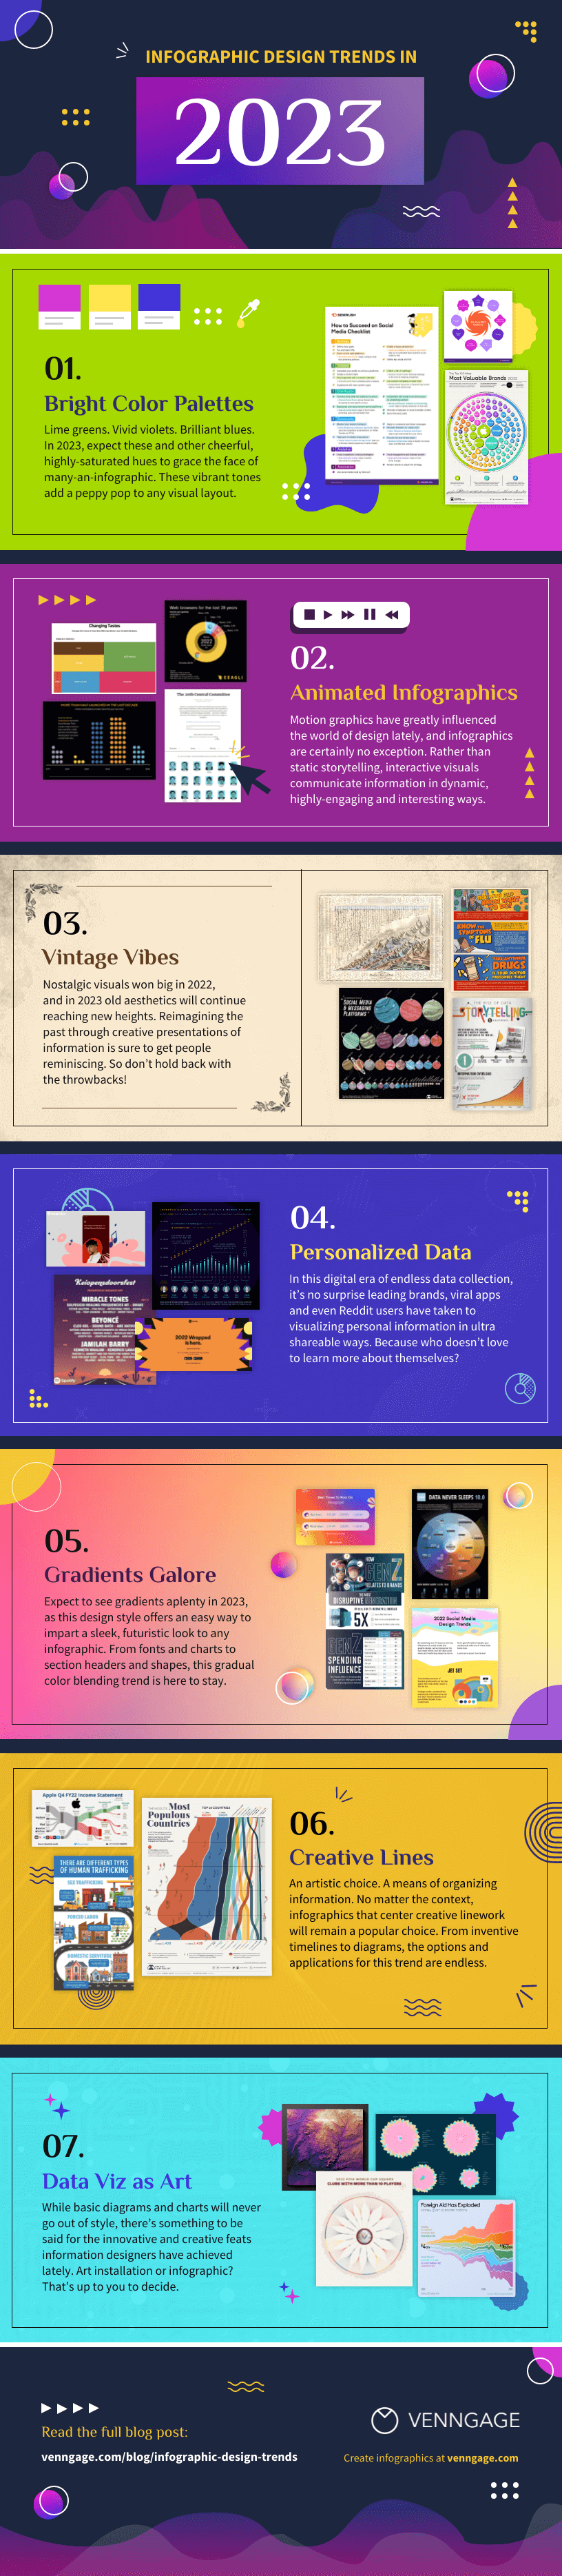 Infographic of 2023 design trends